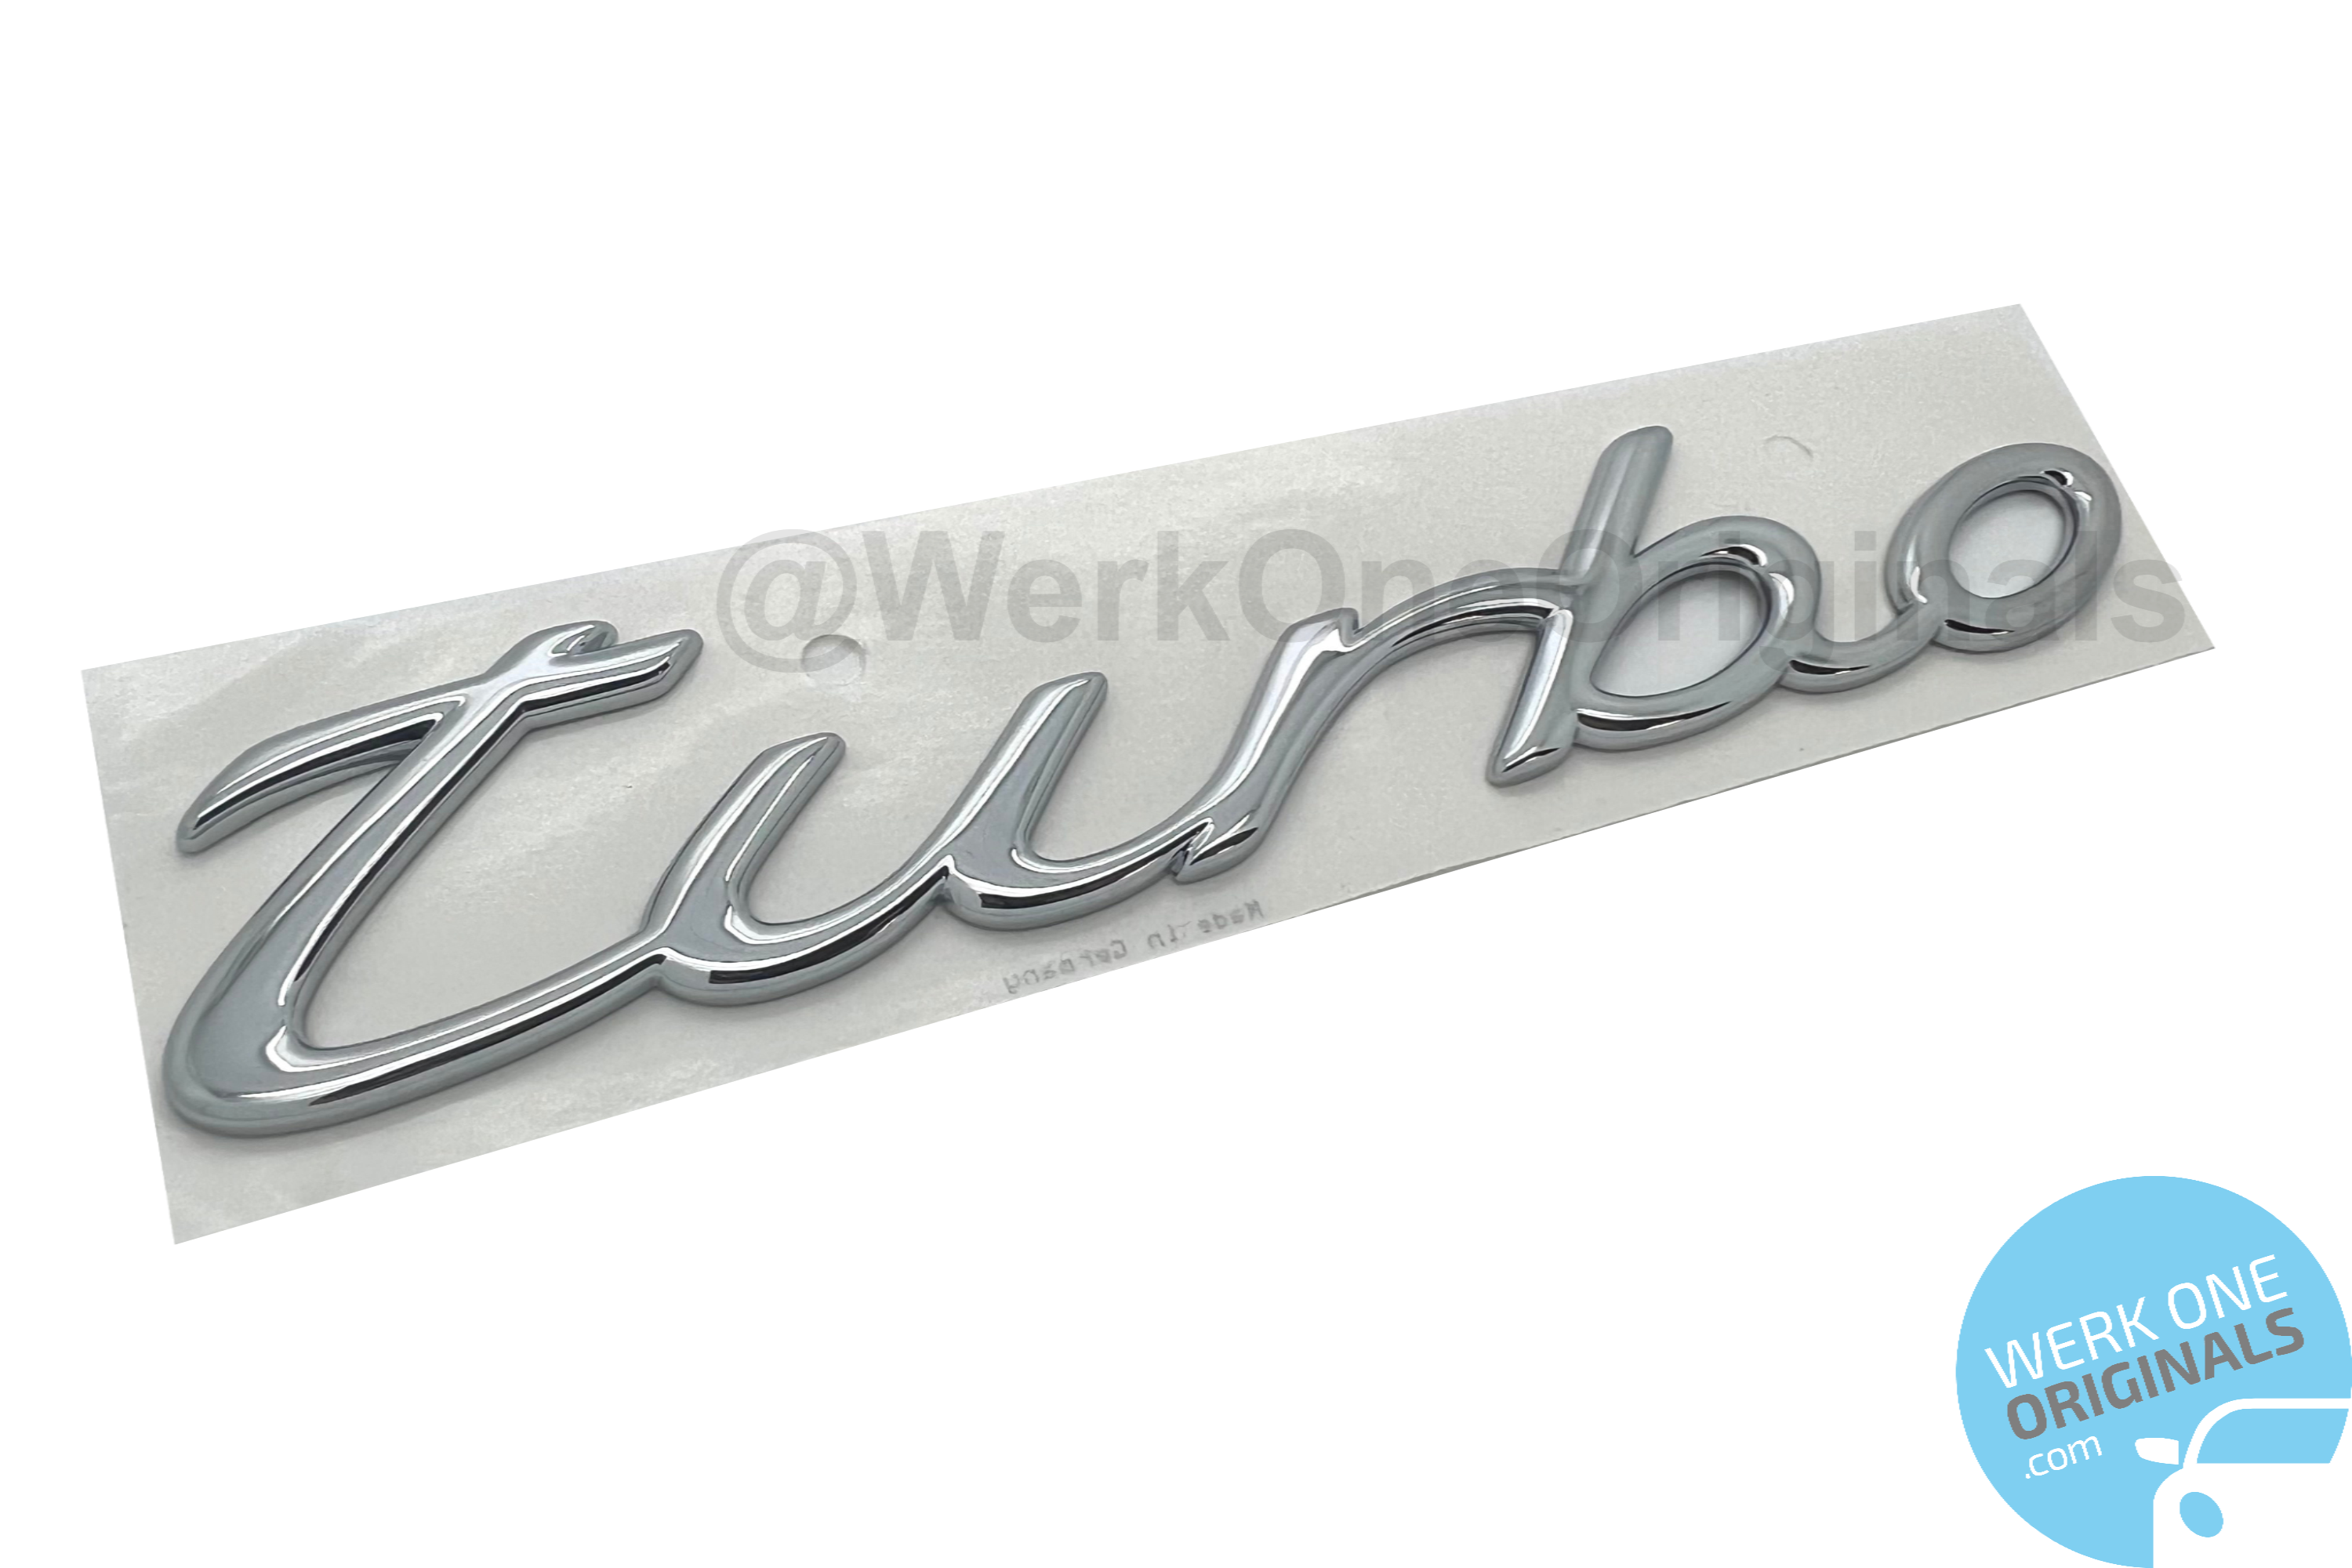 Porsche Official 'Turbo' Rear Badge Decal in Chrome Silver for 996 Turbo Models